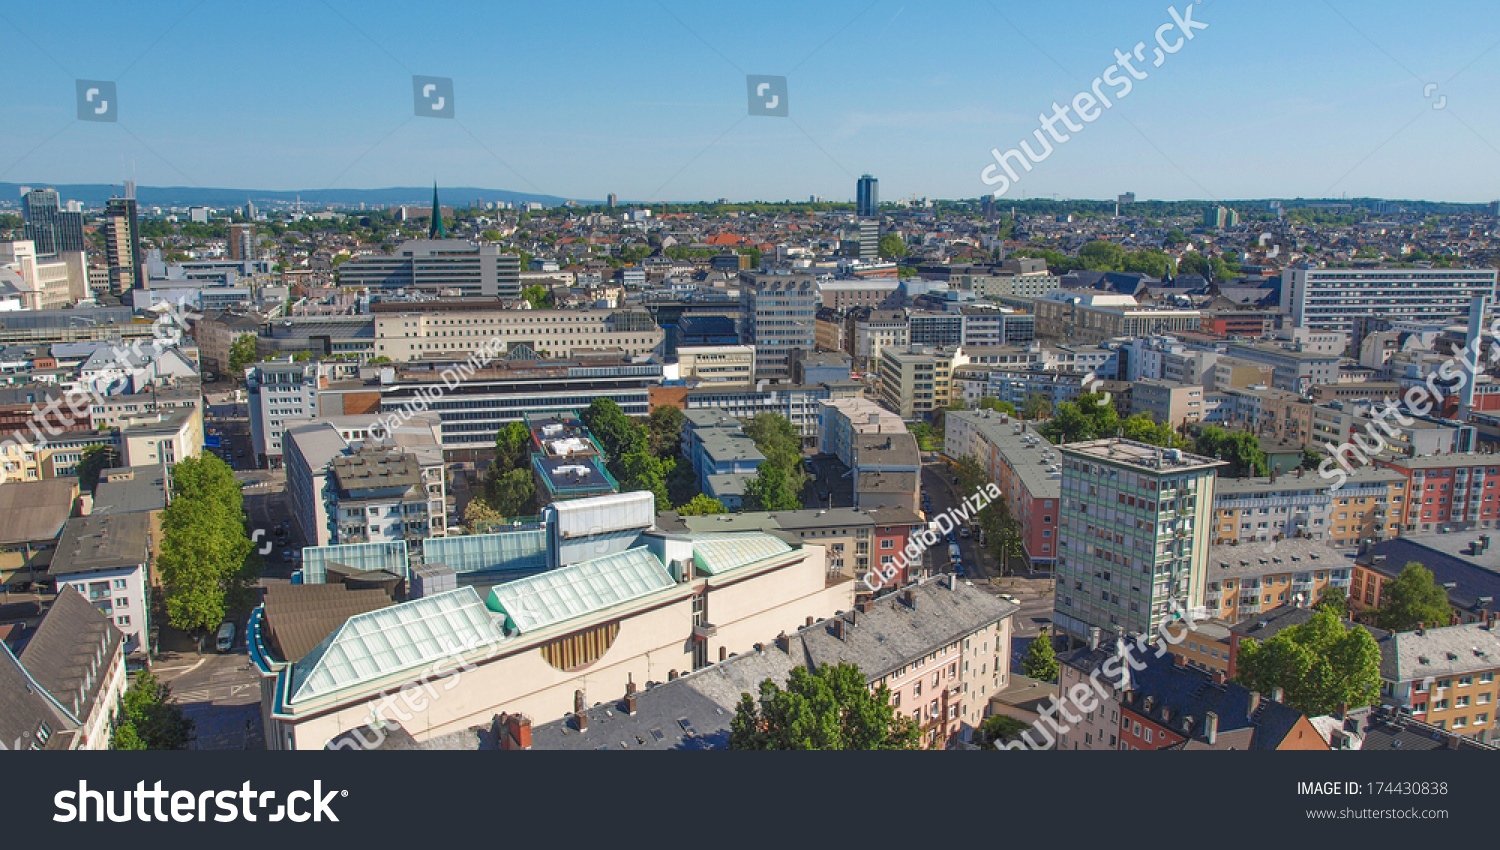 Aerial view of the city of Frankfurt am Main in Germany - wide panoramic view #174430838